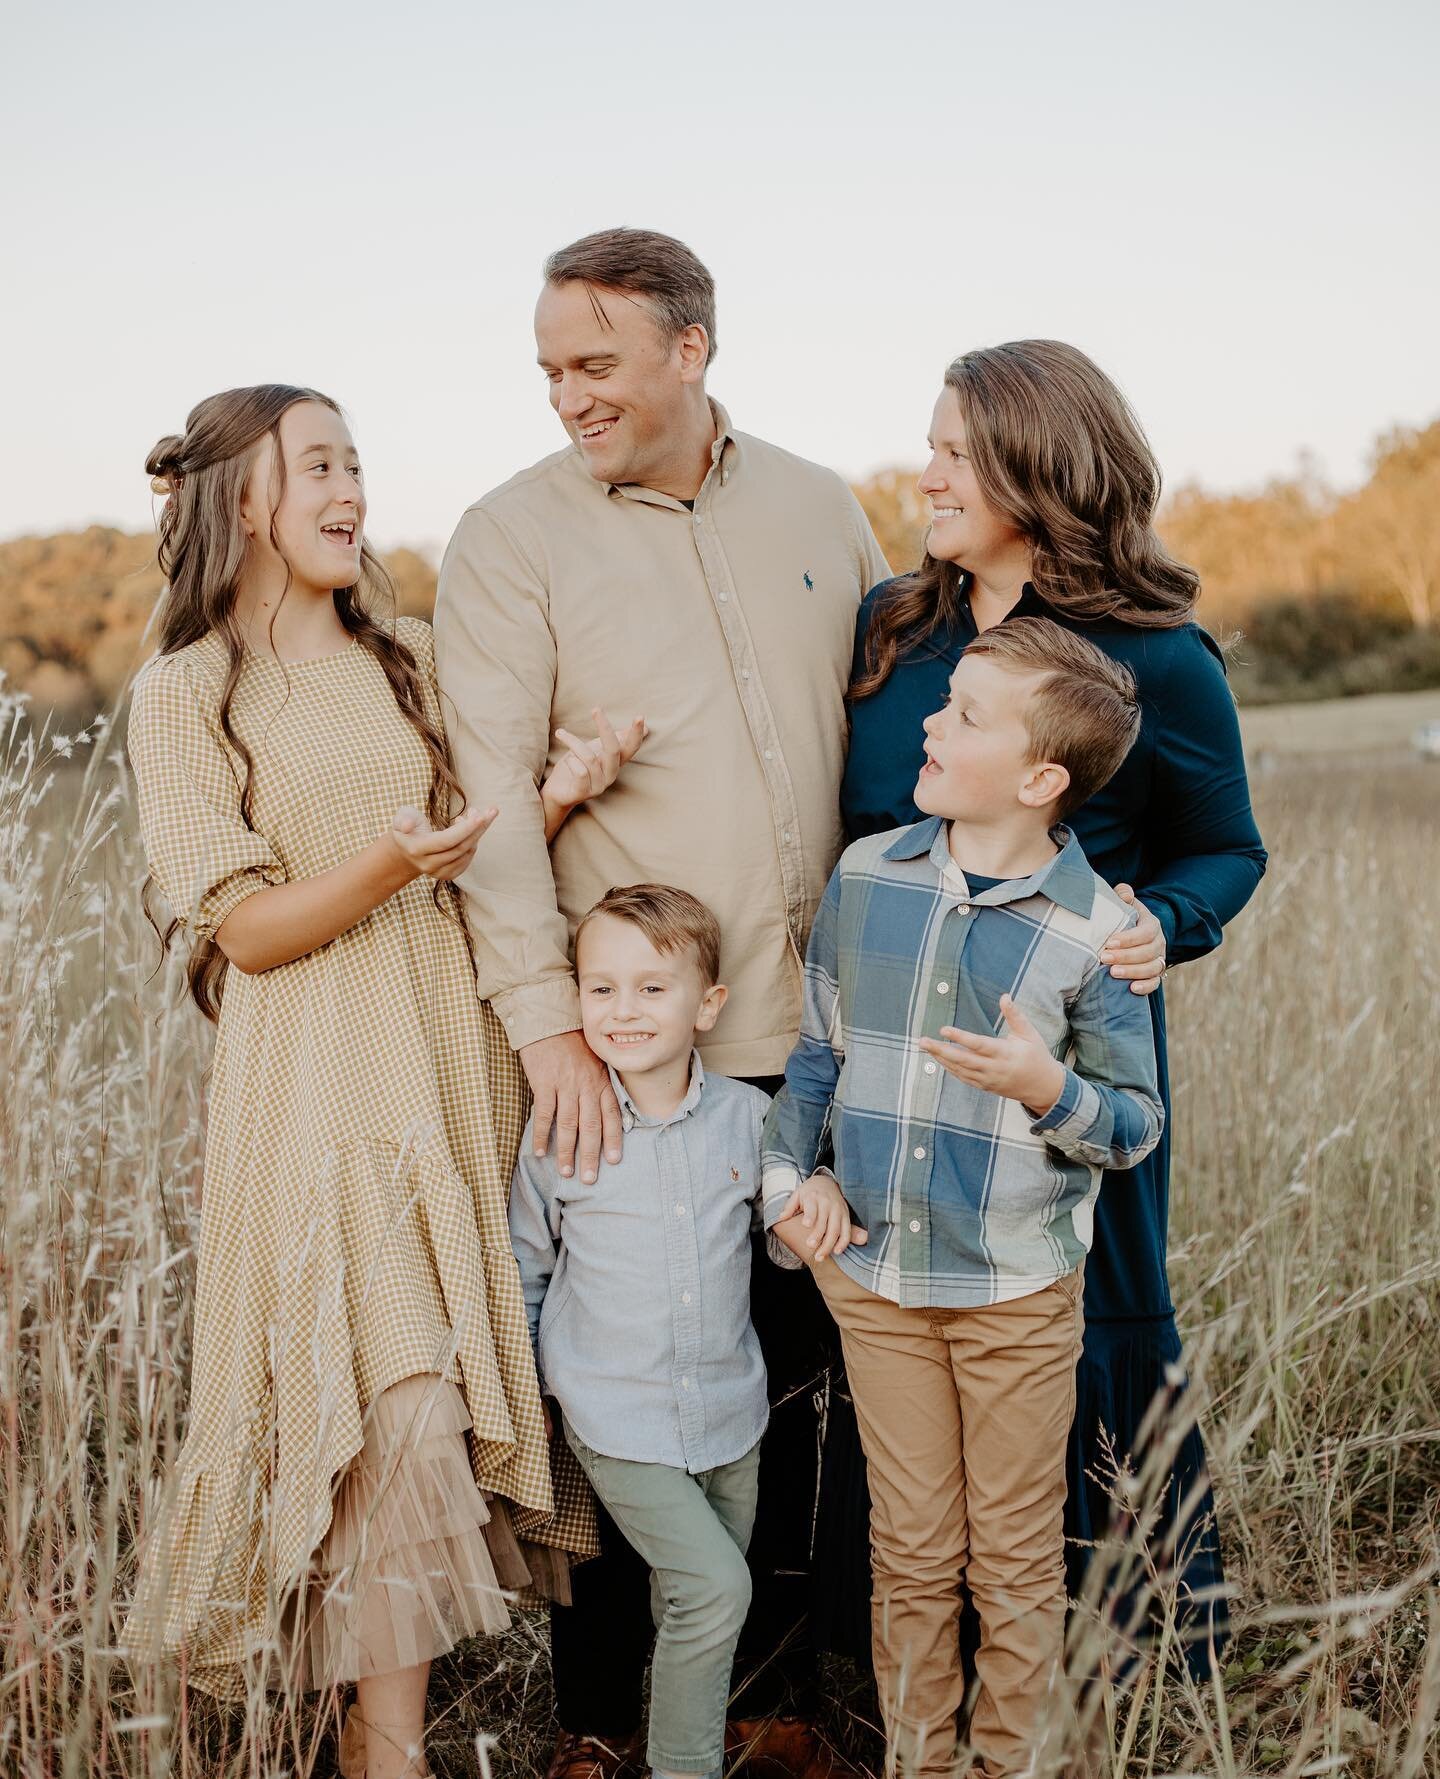 &ldquo;Family: Where life begins and love never ends&hellip; or until the photoshoot is over! 😂📸 

#tennnessee #familyphotographyideas #family #photo #photooftheday #photography #photographer #knoxville #easttennessee